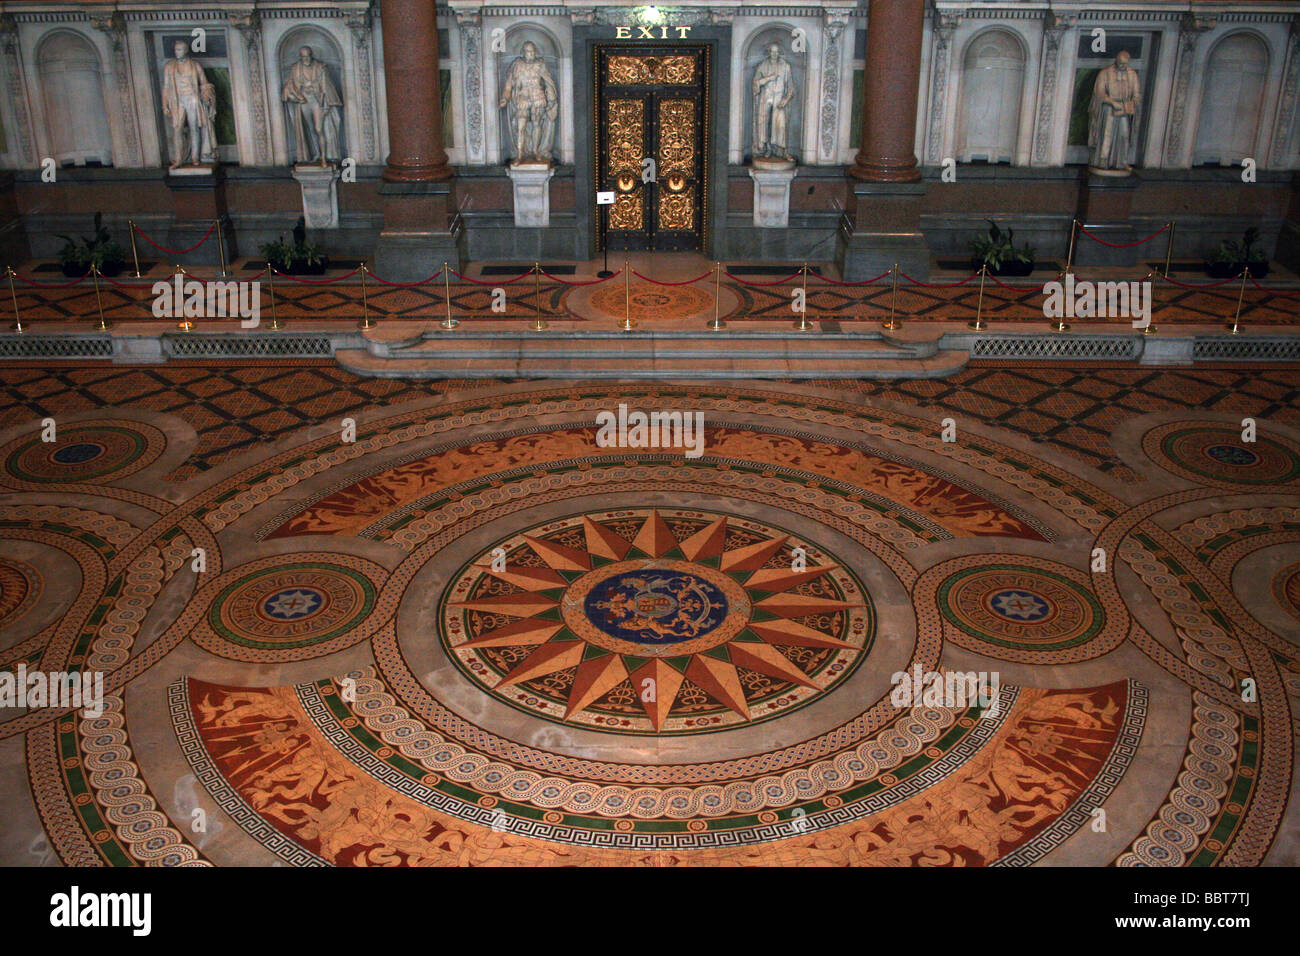 Minton Tiled Floor In The Great Hall, St George's Hall, Liverpool, Merseyside, UK Stock Photo